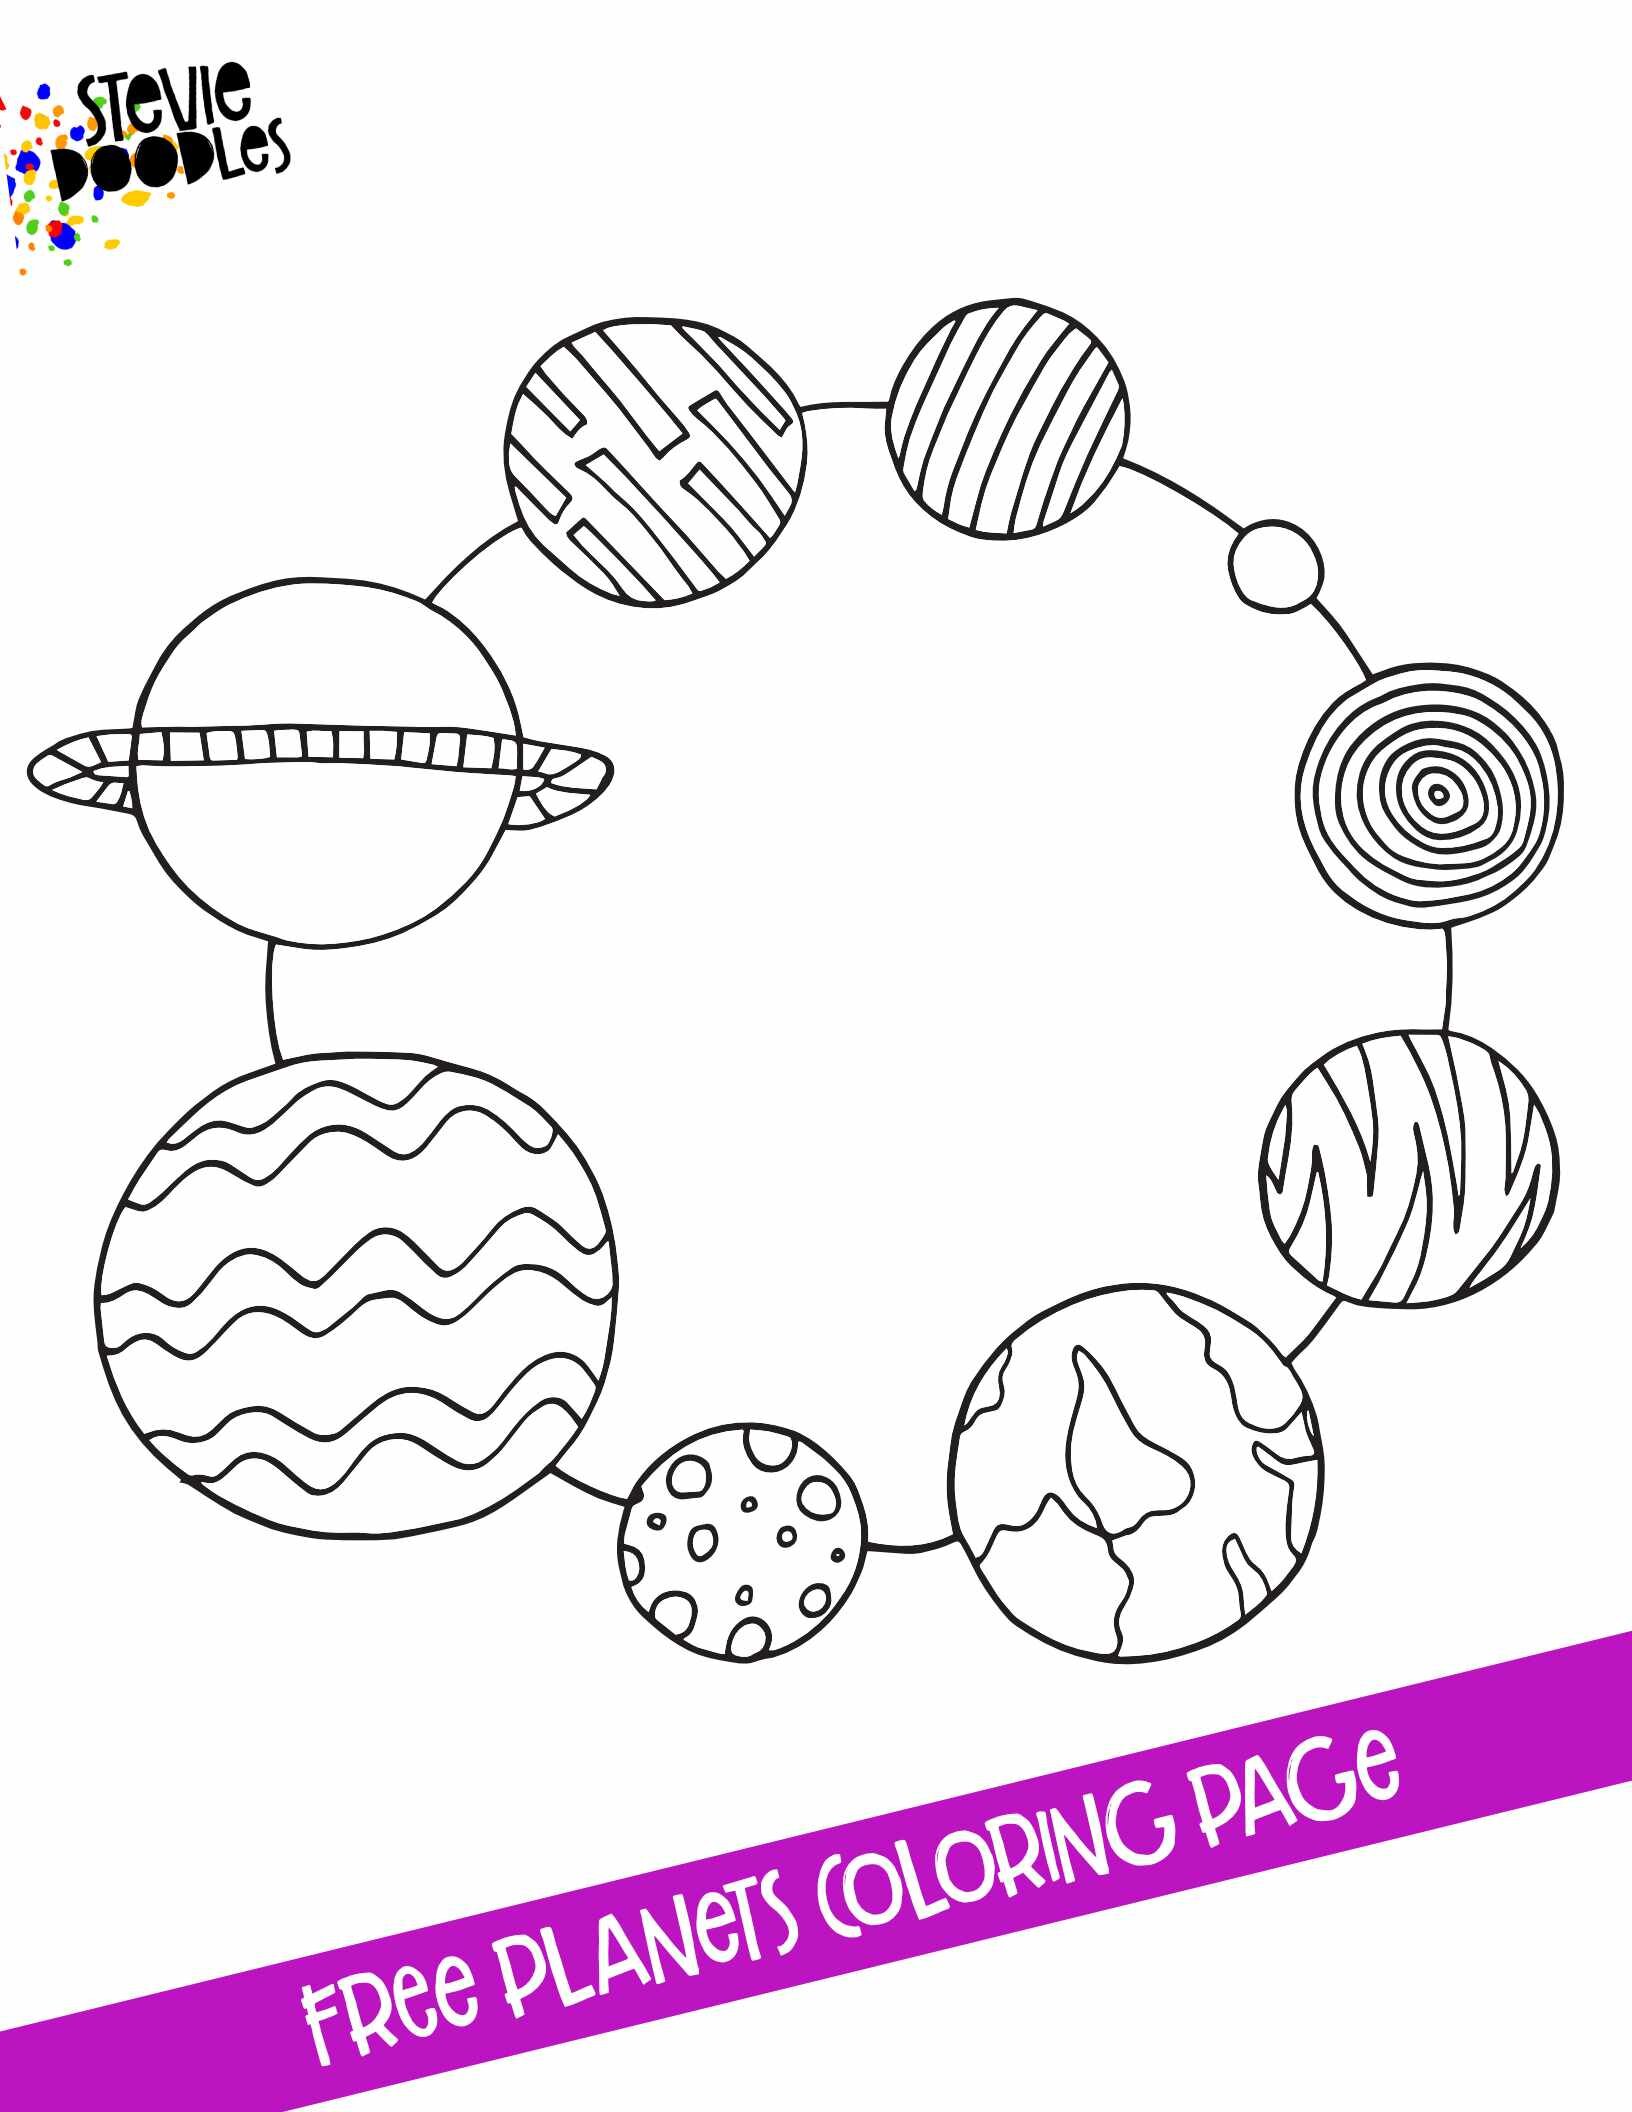 Ring Of Planets - A Free Printable Coloring Page. Over 1000 Free Coloring Pages on Stevie Doodles CLICK HERE TO DOWNLOAD THE RING OF PLANETS COLORING PAGE